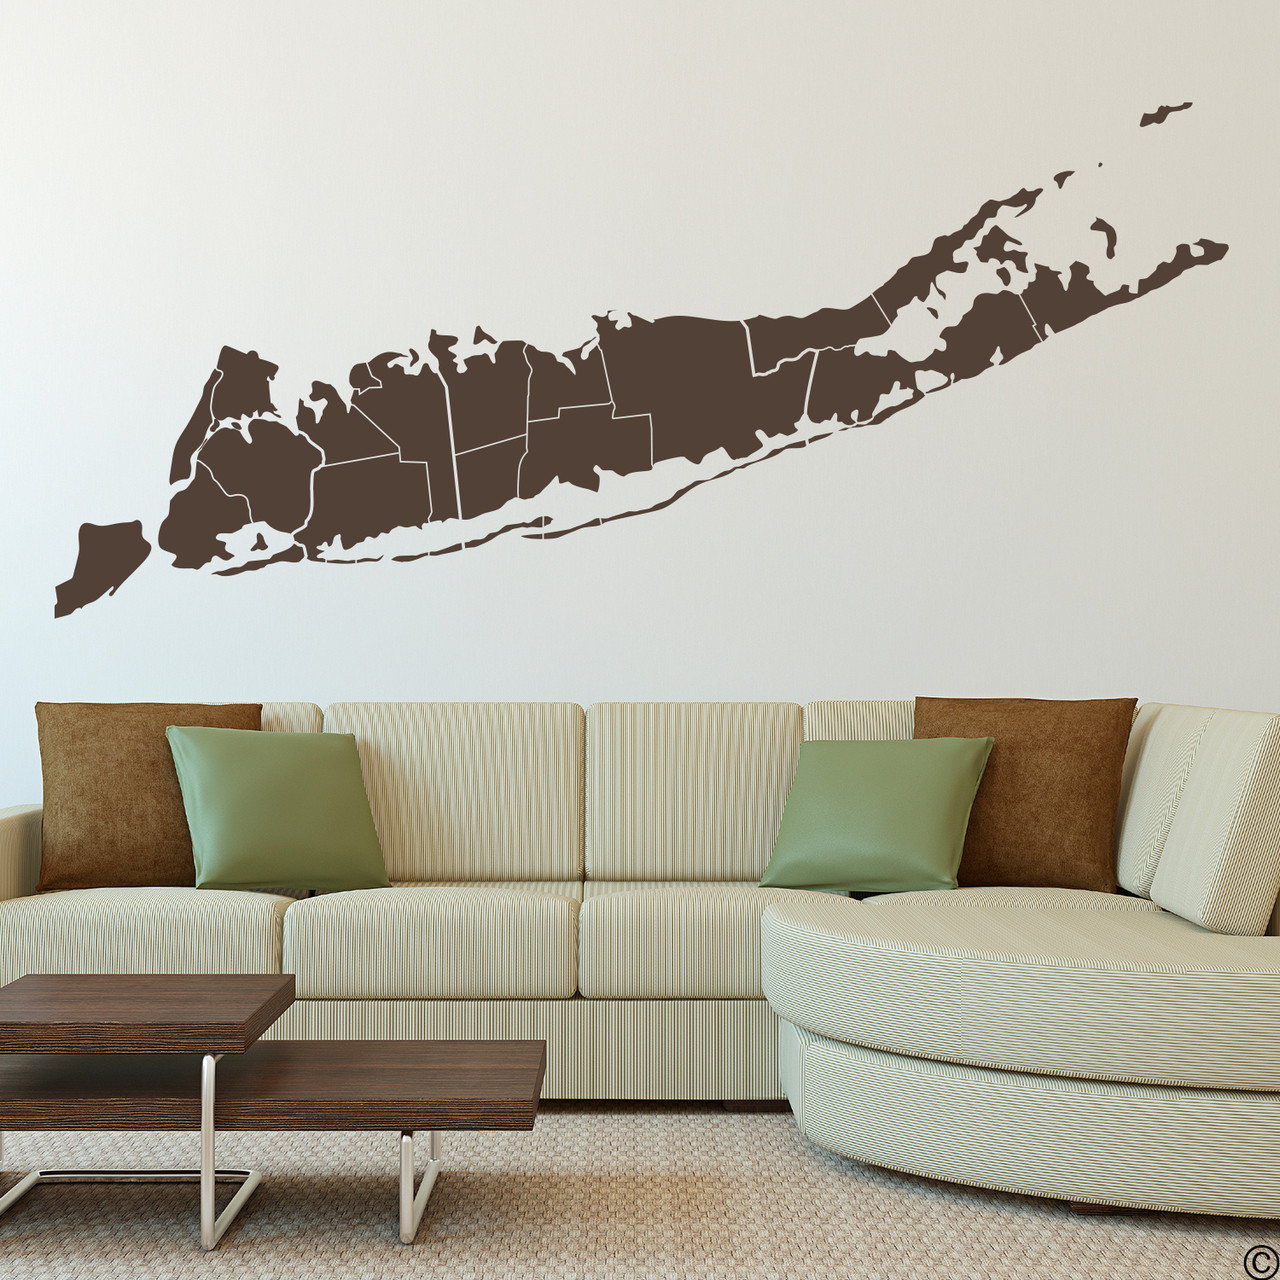 Long Island and NYC wall map decal in brown